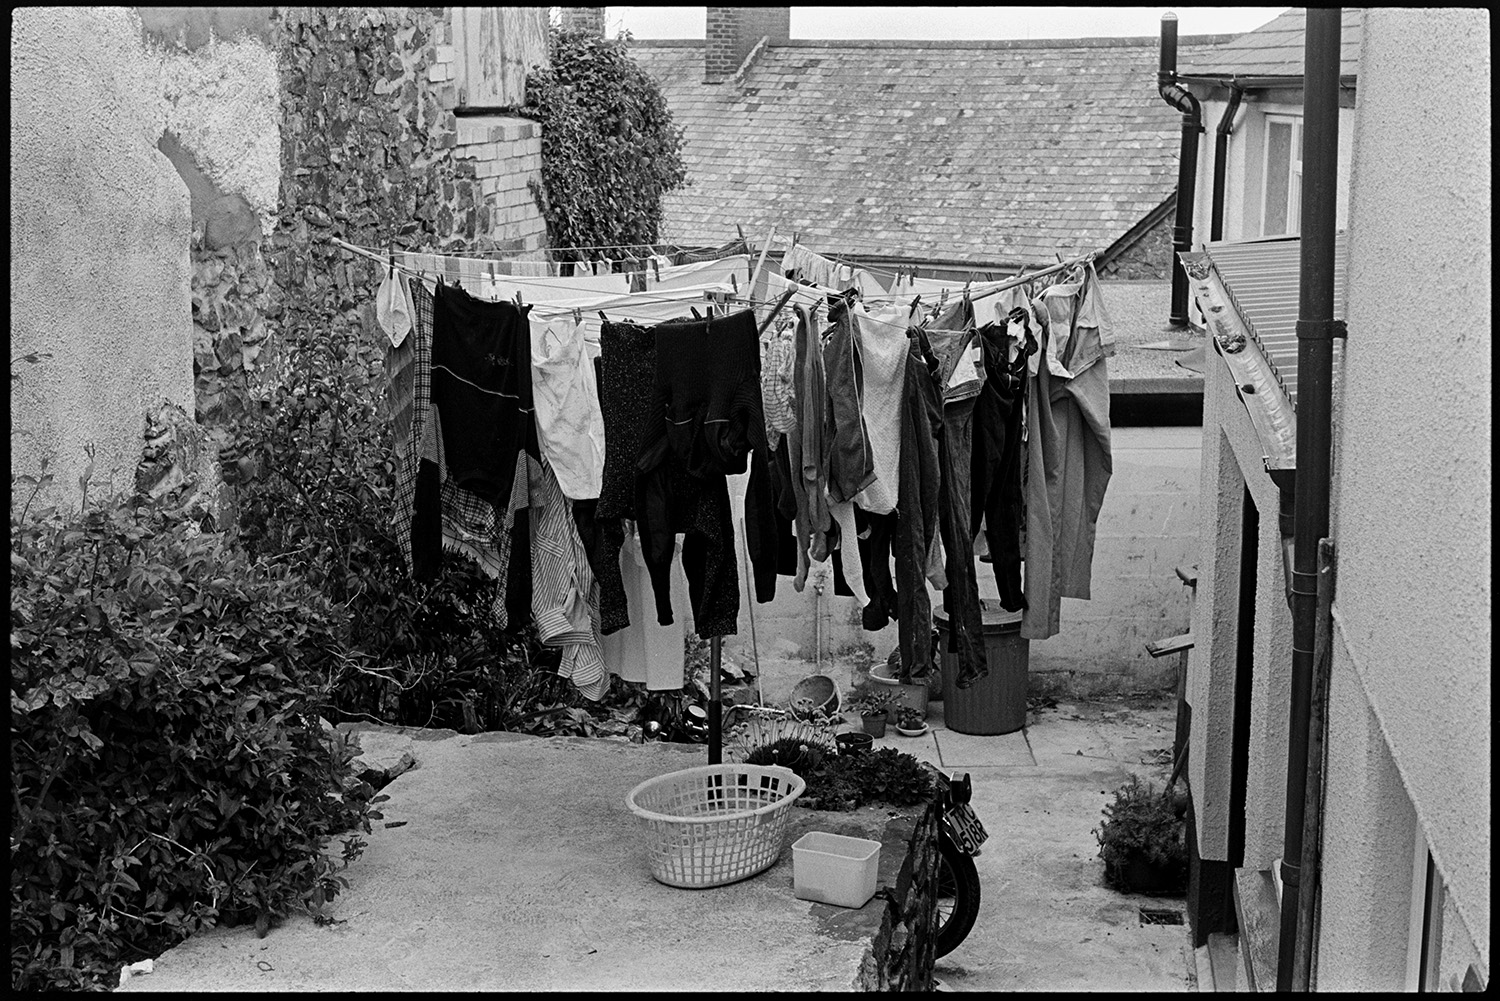 Washing line in yard. 
[Washing hung up to dry on a rotary washing line in the back yard of a house in Winkleigh. A washing basket and tub of pegs is on the patio. The wheel of a motorbike and a dustbin can also be seen in the yard.]